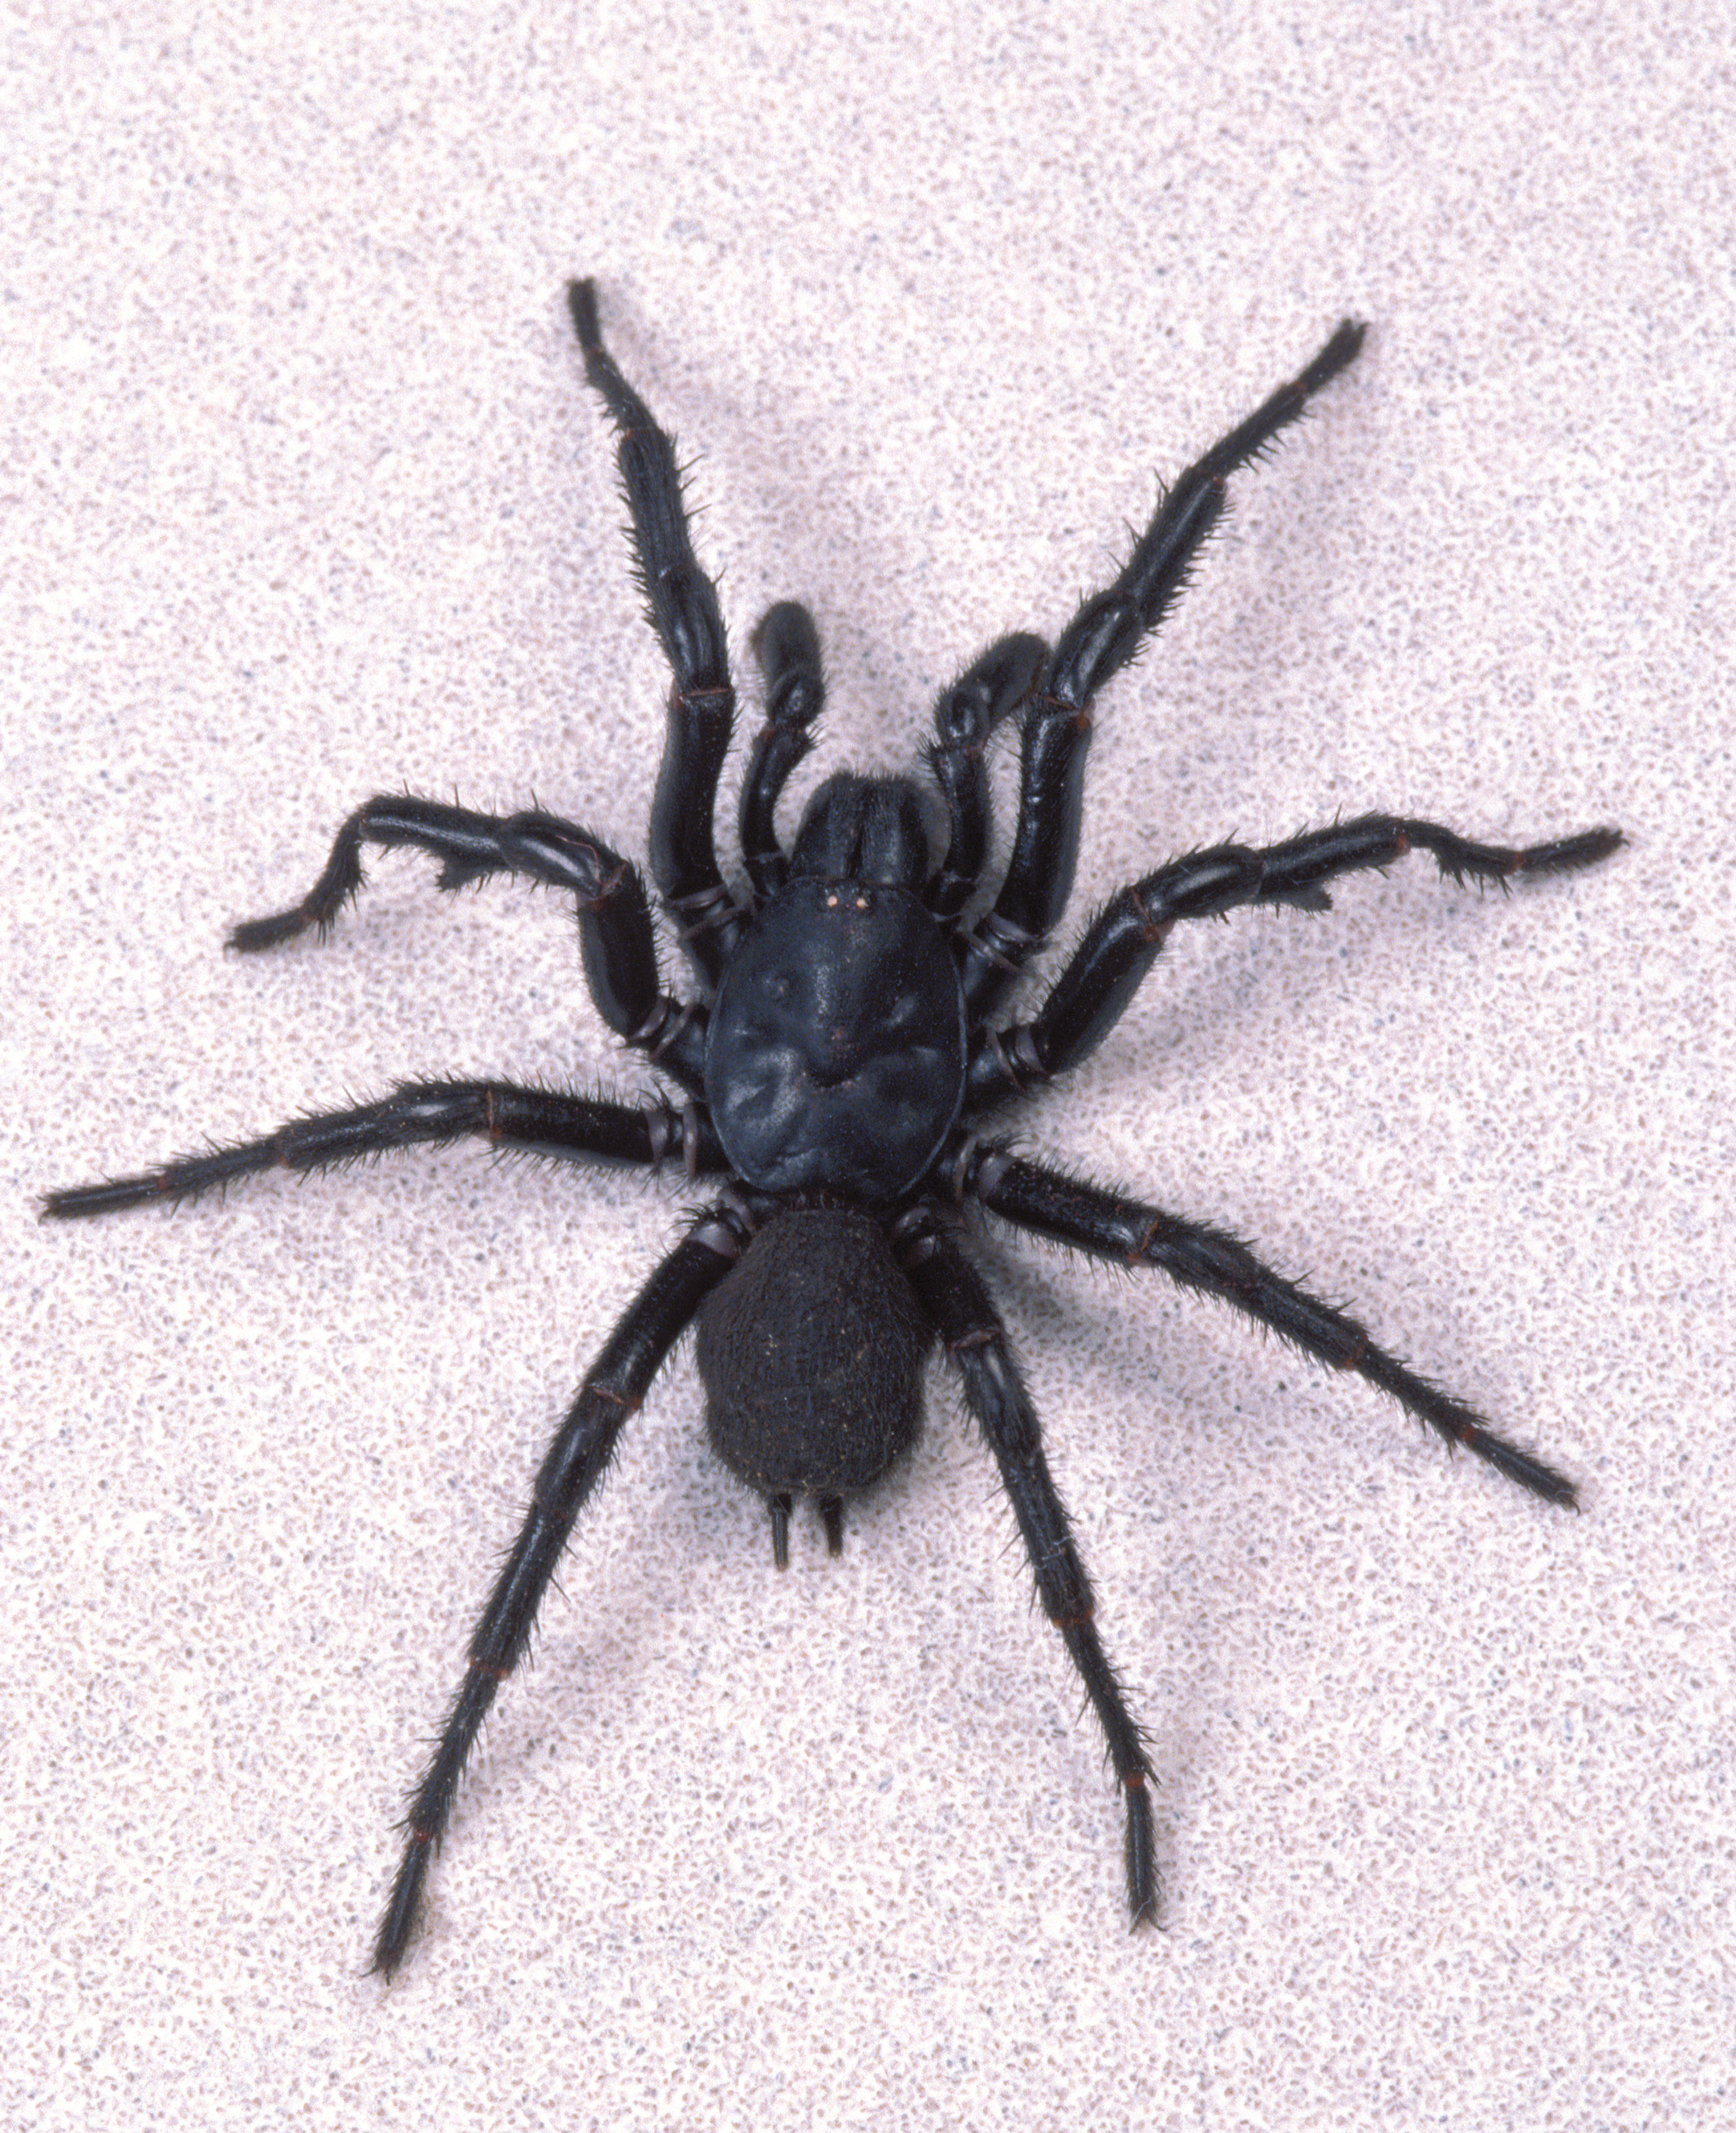 5 Most Venomous Australian Spiders To Avoid With Pictures ...